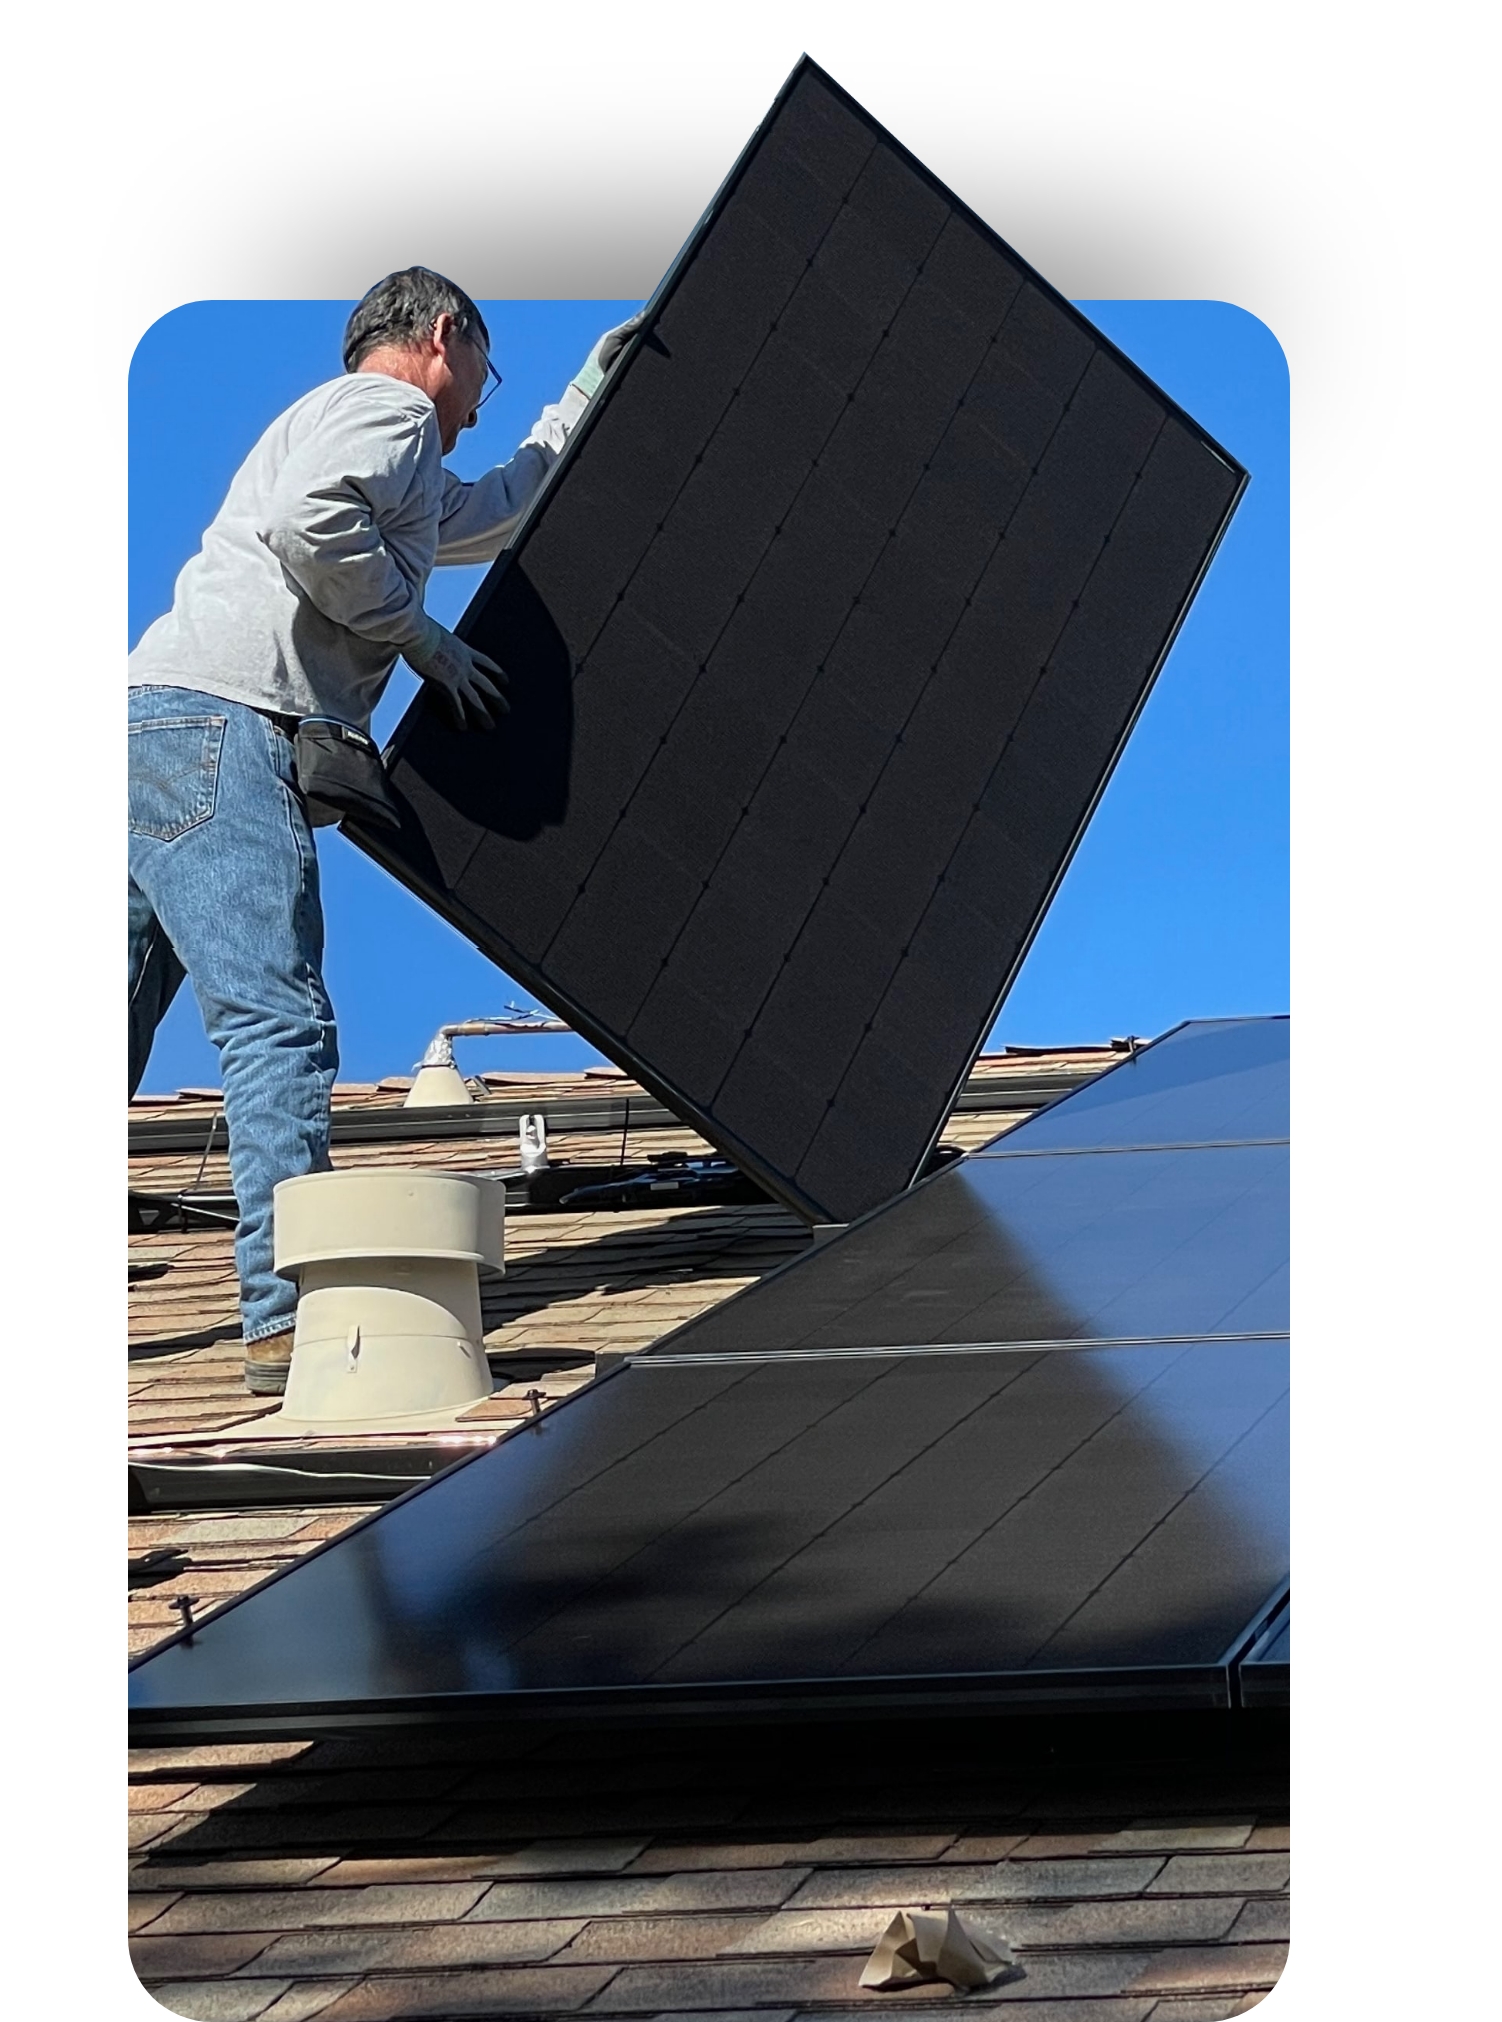 Reducing energy costs and carbon dioxide are some of the advantages of renewable energy sources like solar panels. Colorado Springs, CO, is a great city to invest in solar installation.